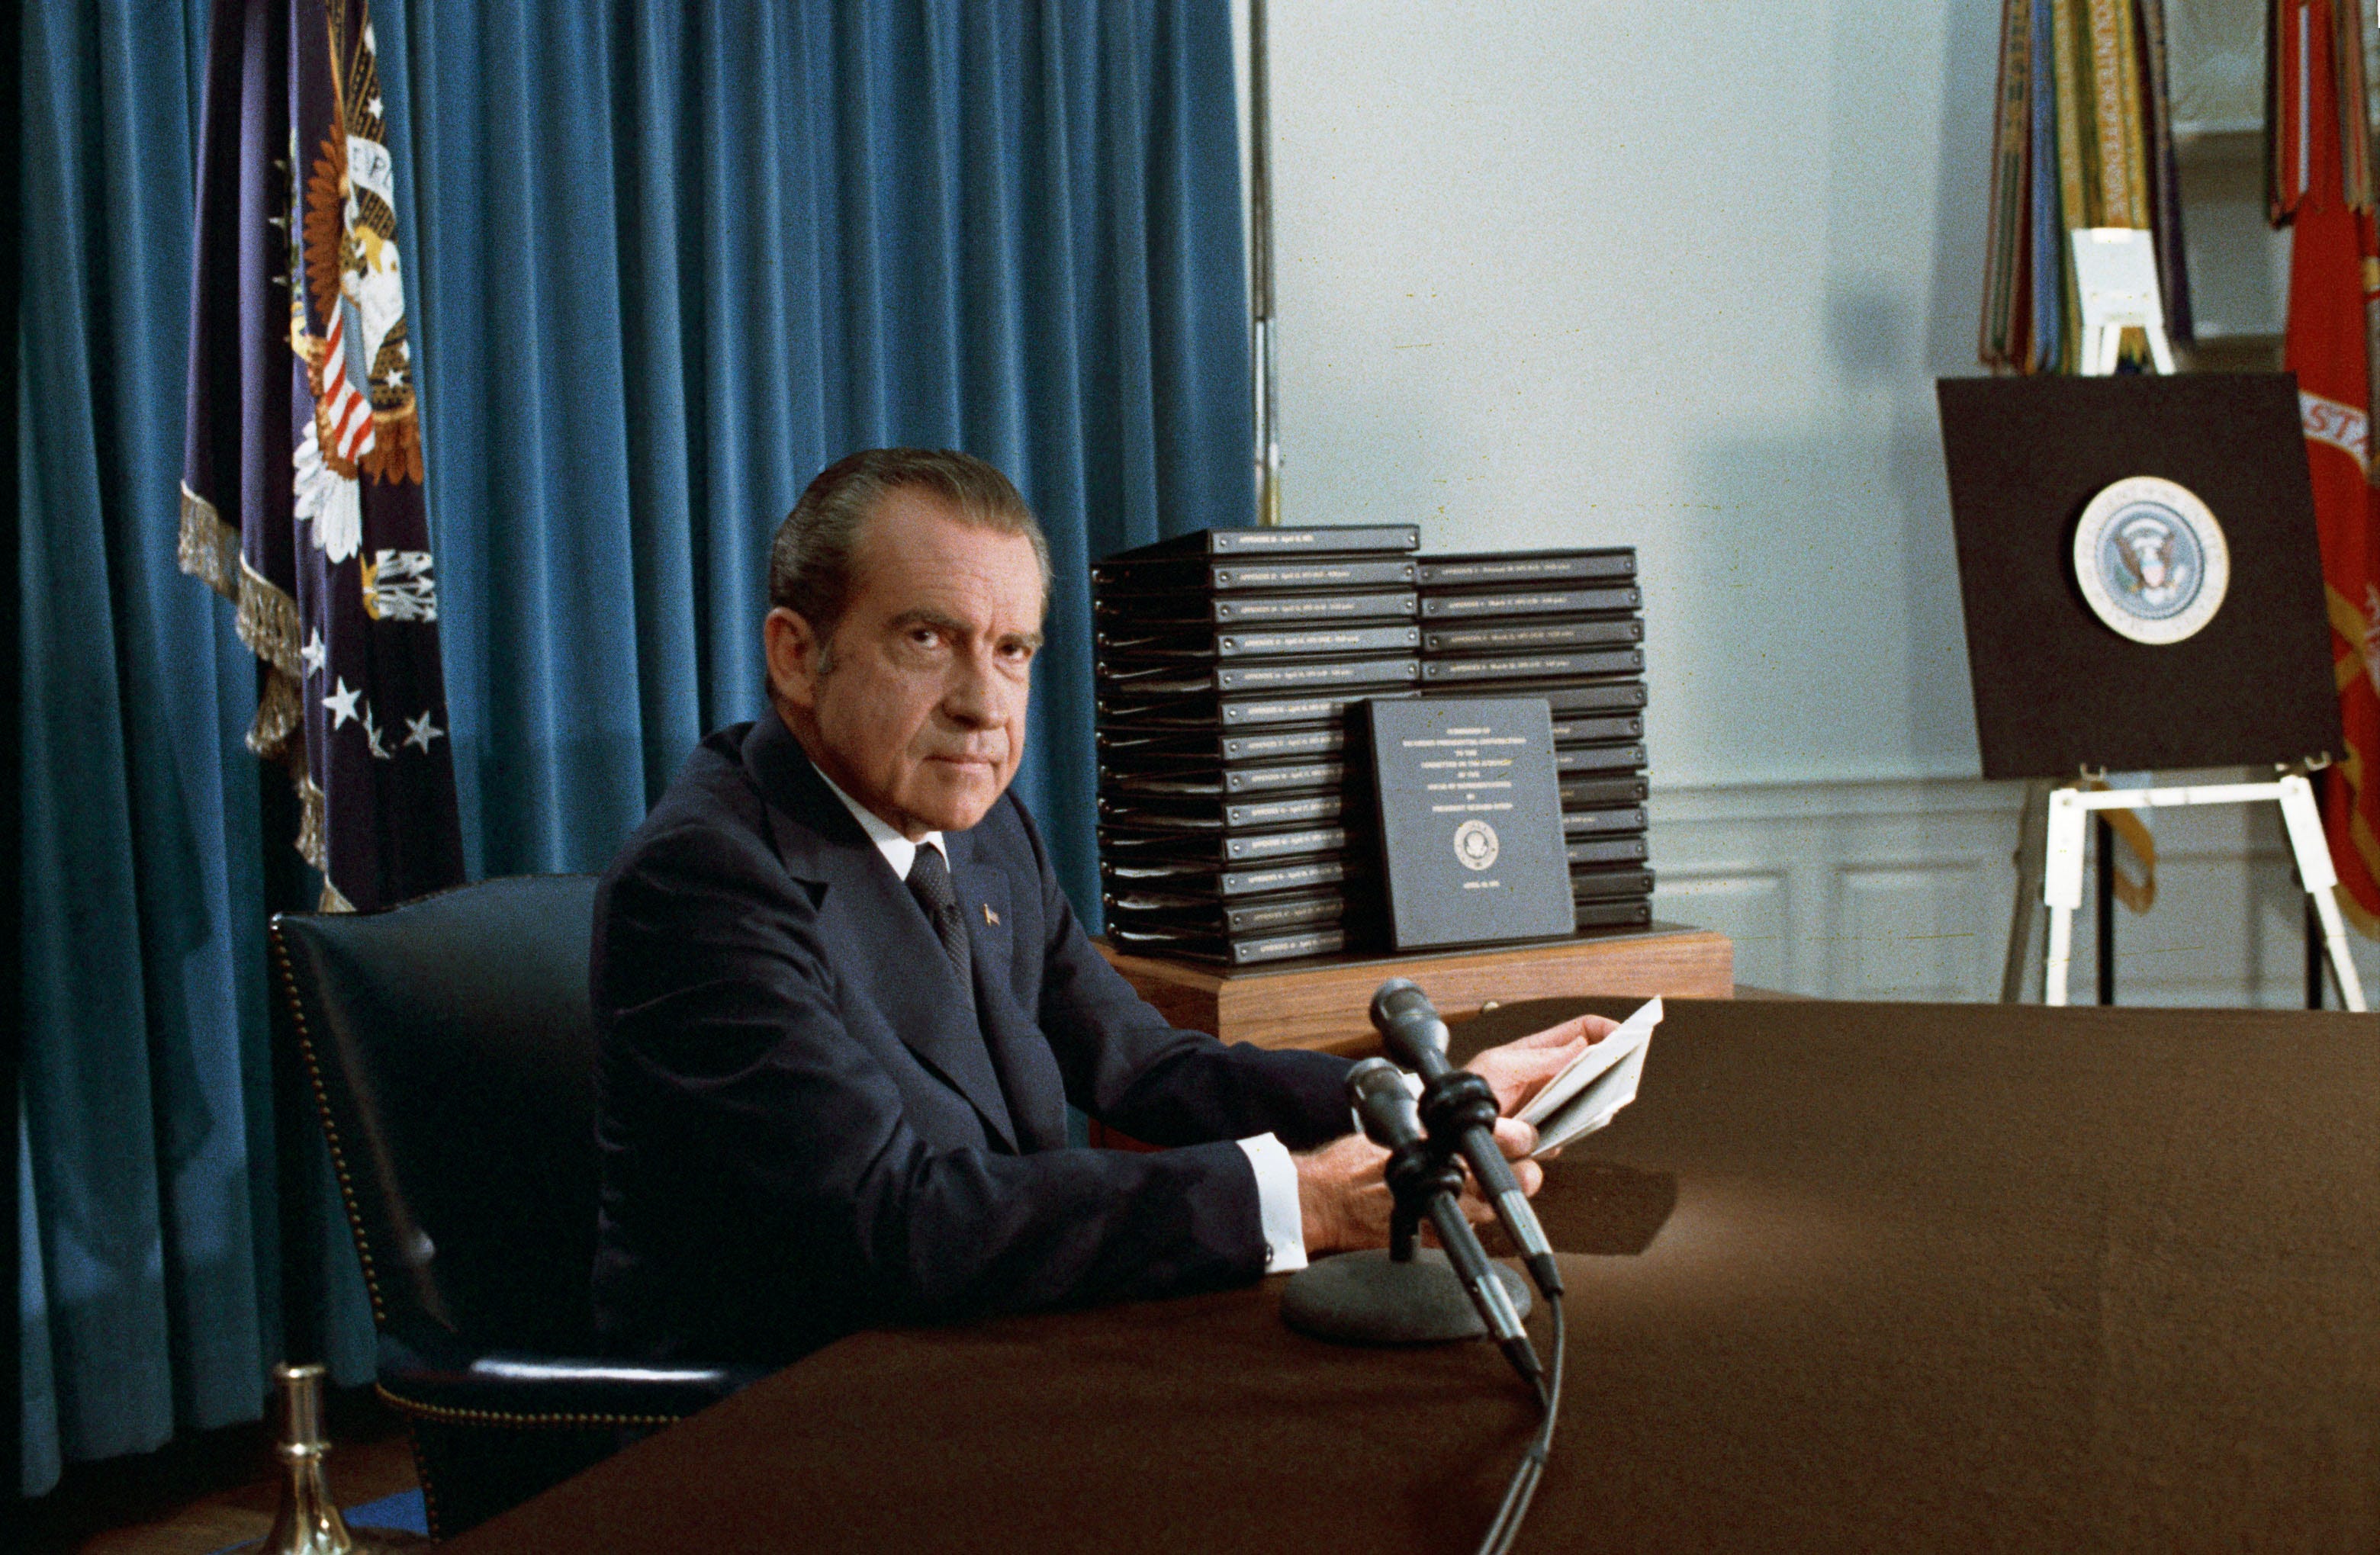 Richard Nixon Announces Resignation 48 Years Ago Today: What's Happened Since?